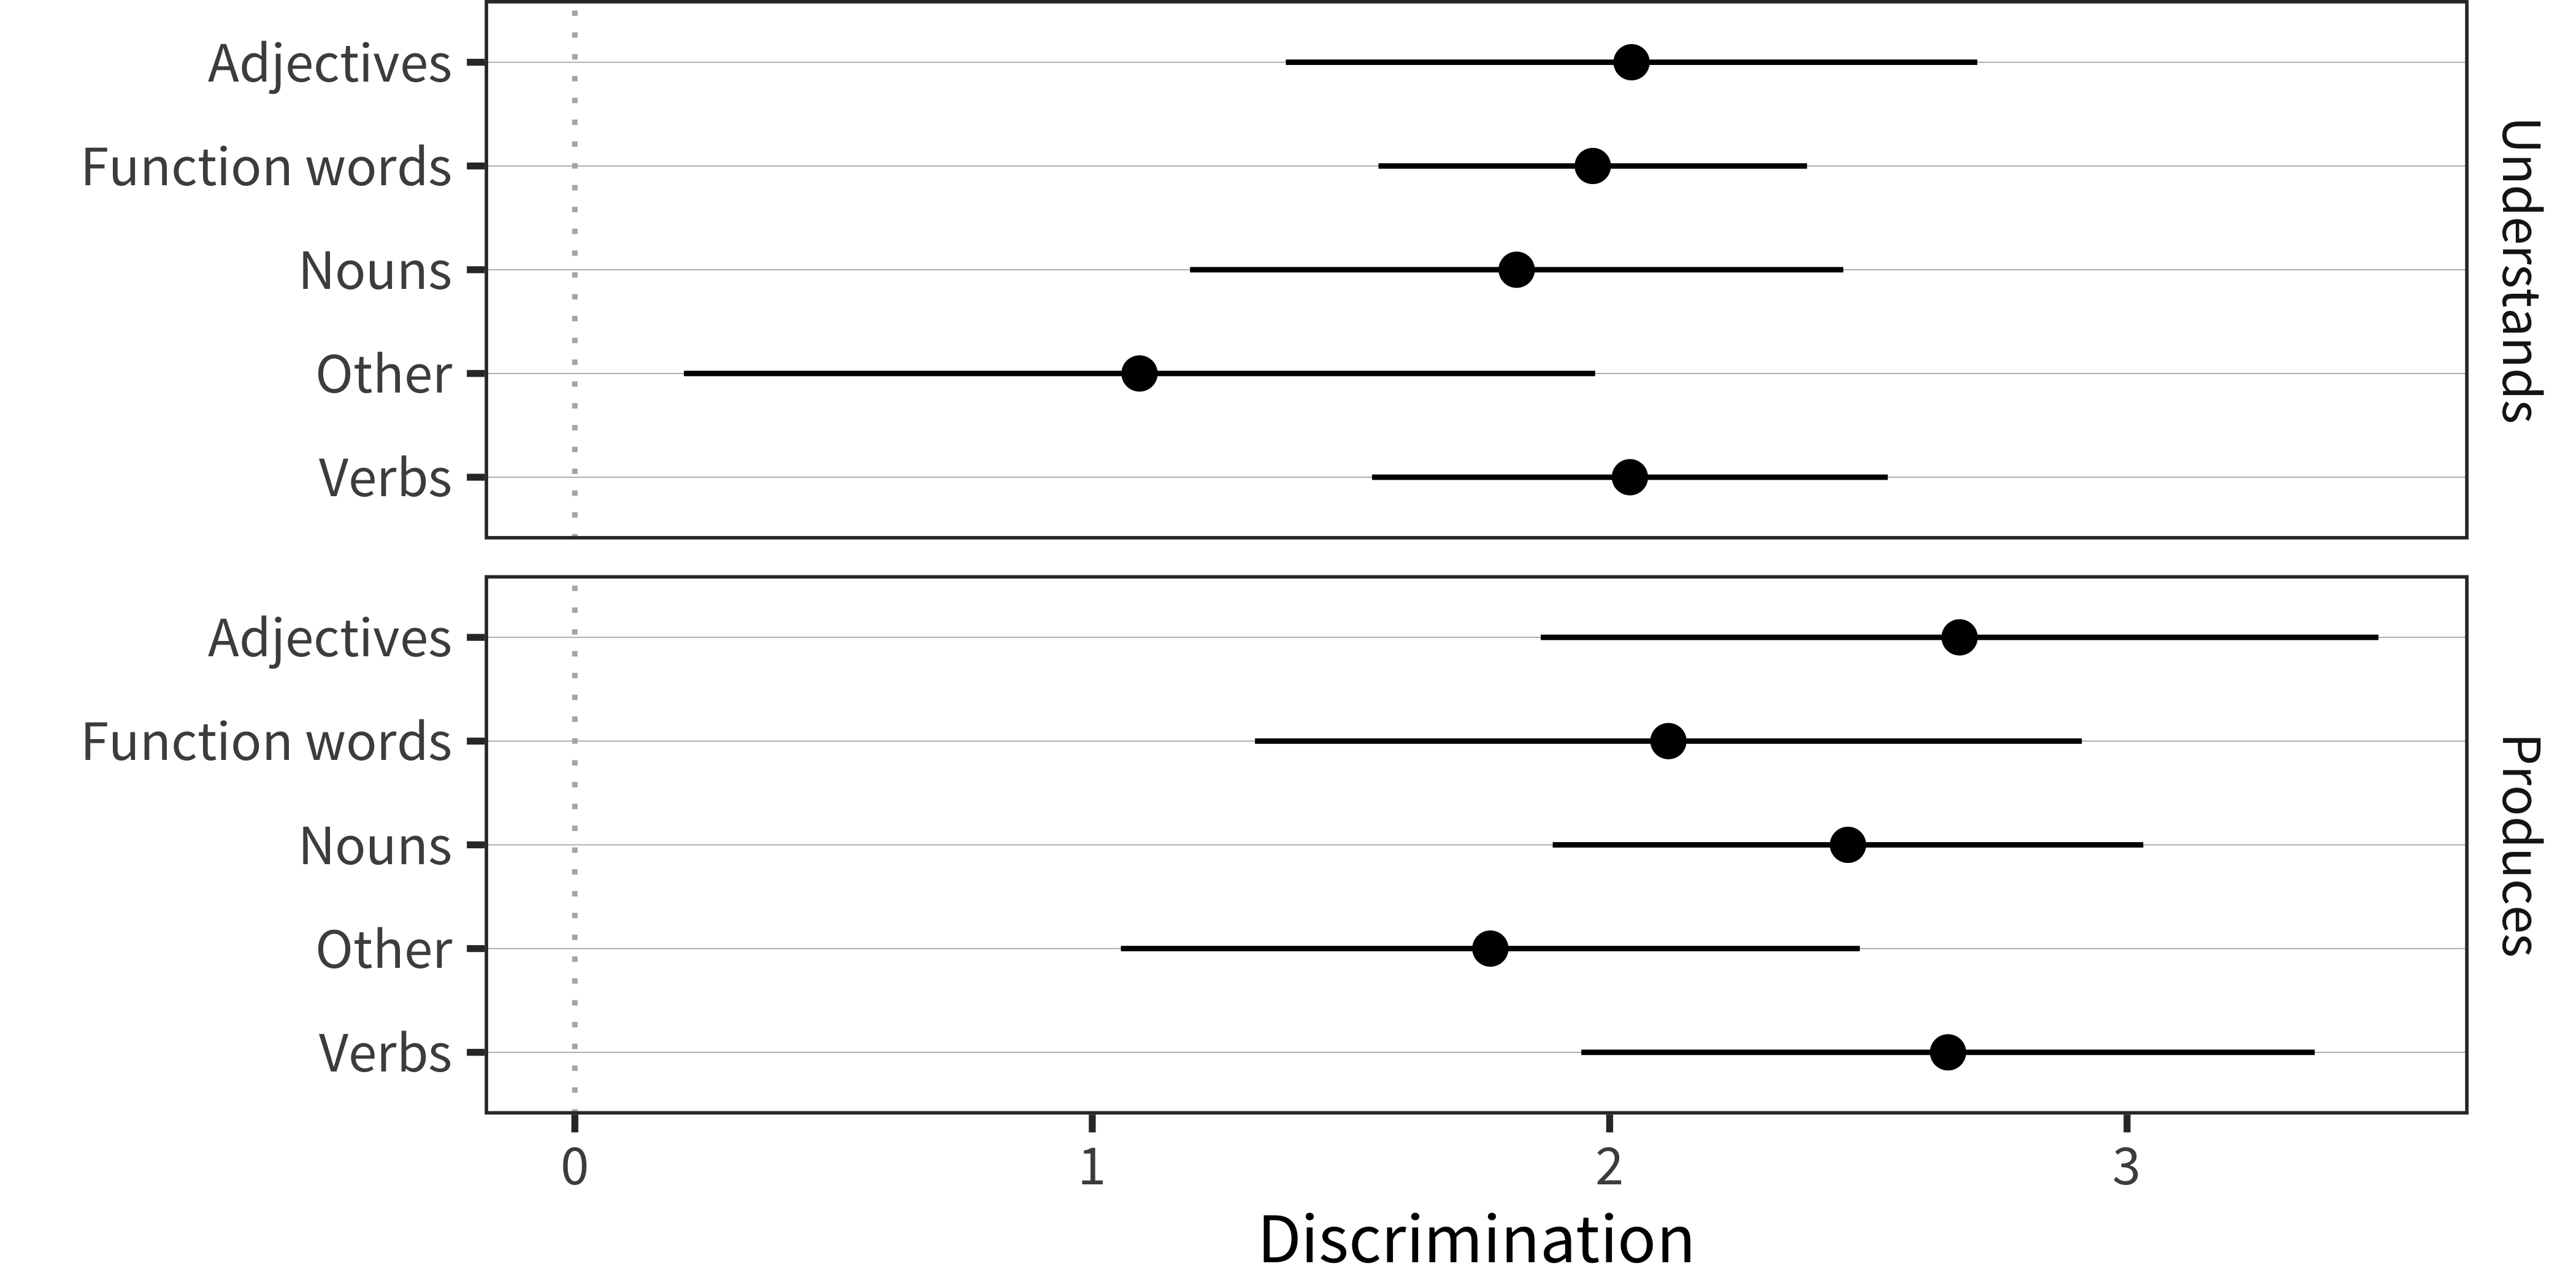 Mean discrimination values for individual words' in production and comprehension measures from the Words and Gestures form (error bars show SD).